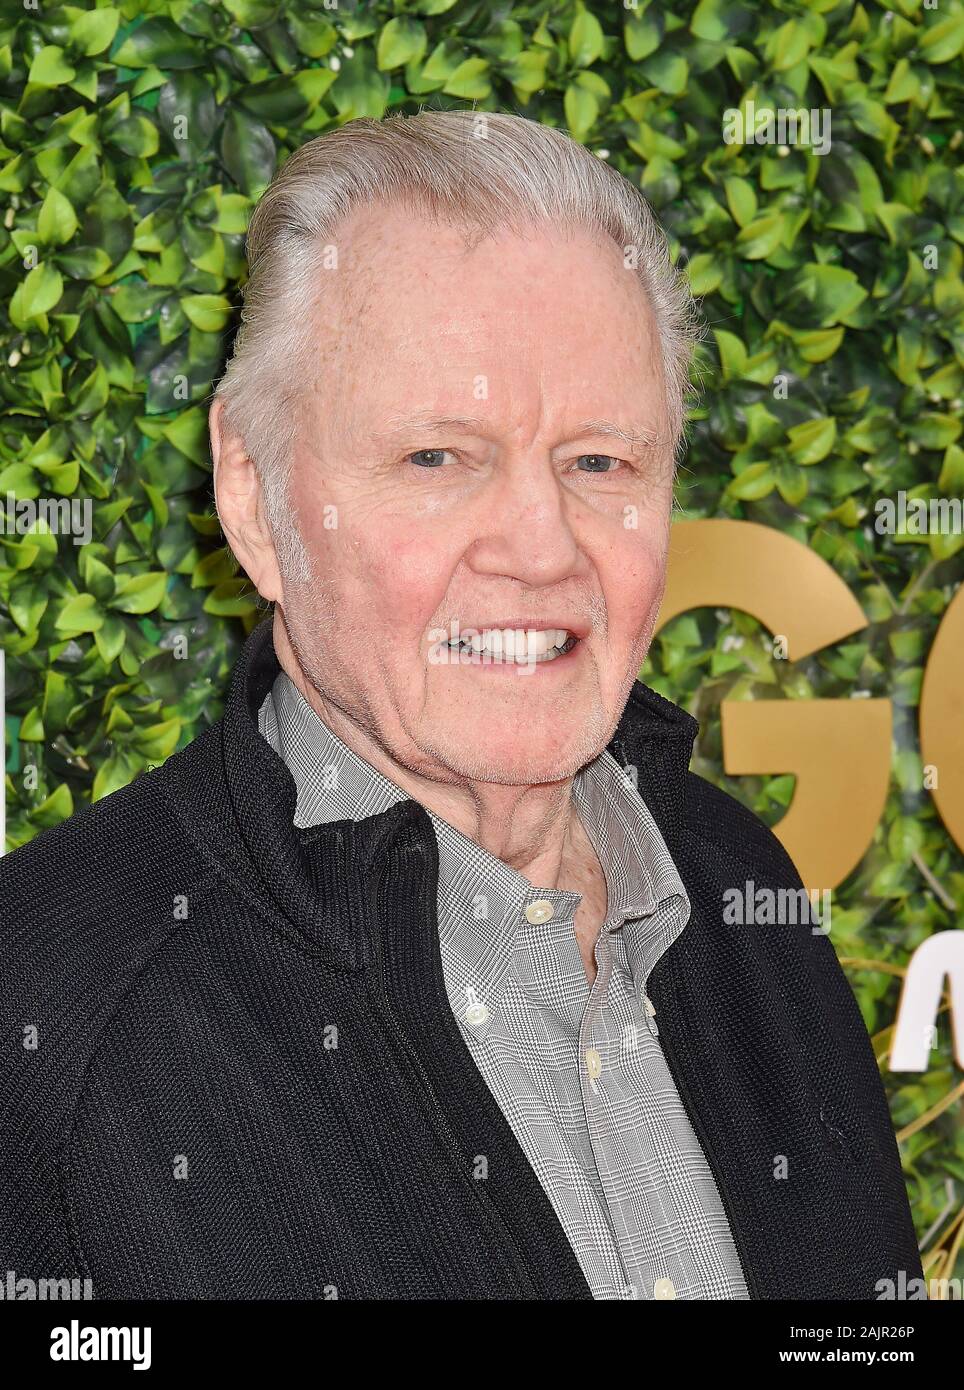 BEVERLY HILLS, CA - JANUARY 04: Jon Voight attends the 7th Annual Gold Meets Golden at Virginia Robinson Gardens and Estate on January 04, 2020 in Los Angeles, California. Stock Photo